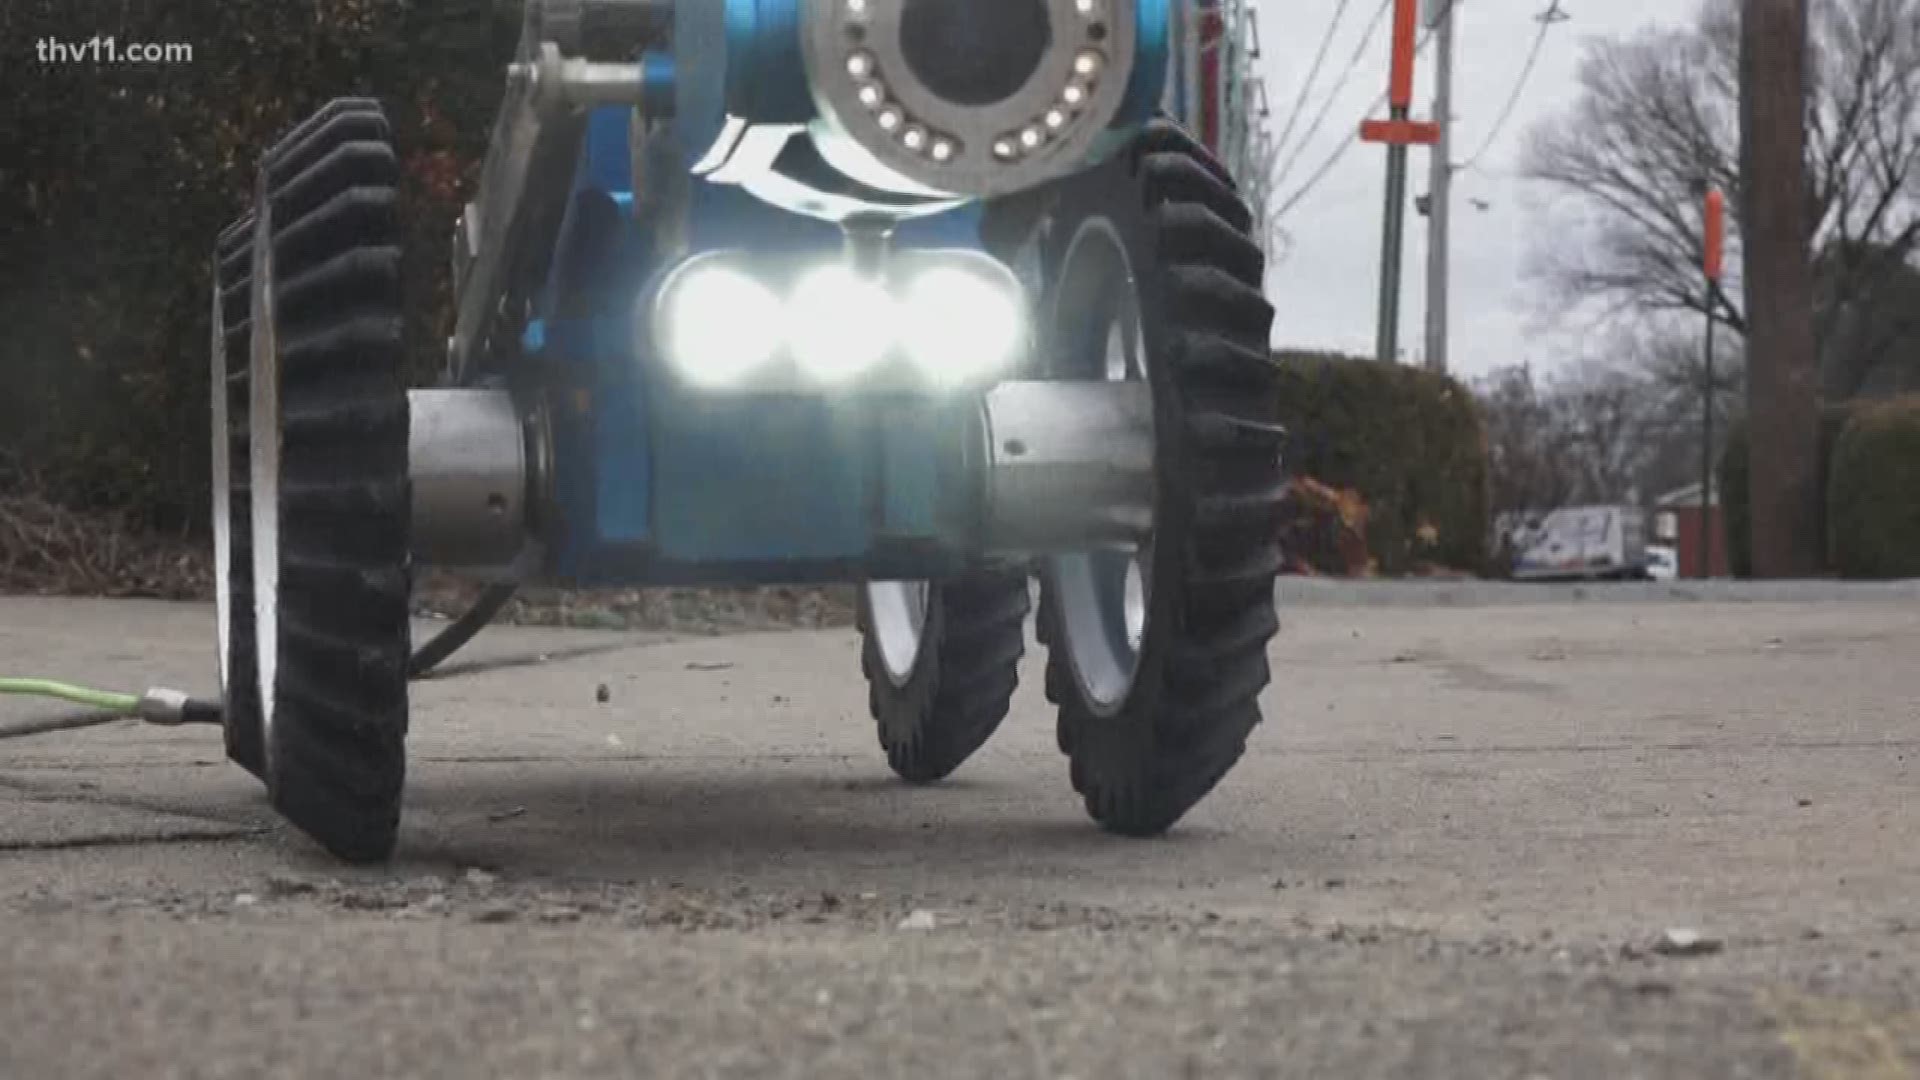 Robots are taking over the city of Conway.